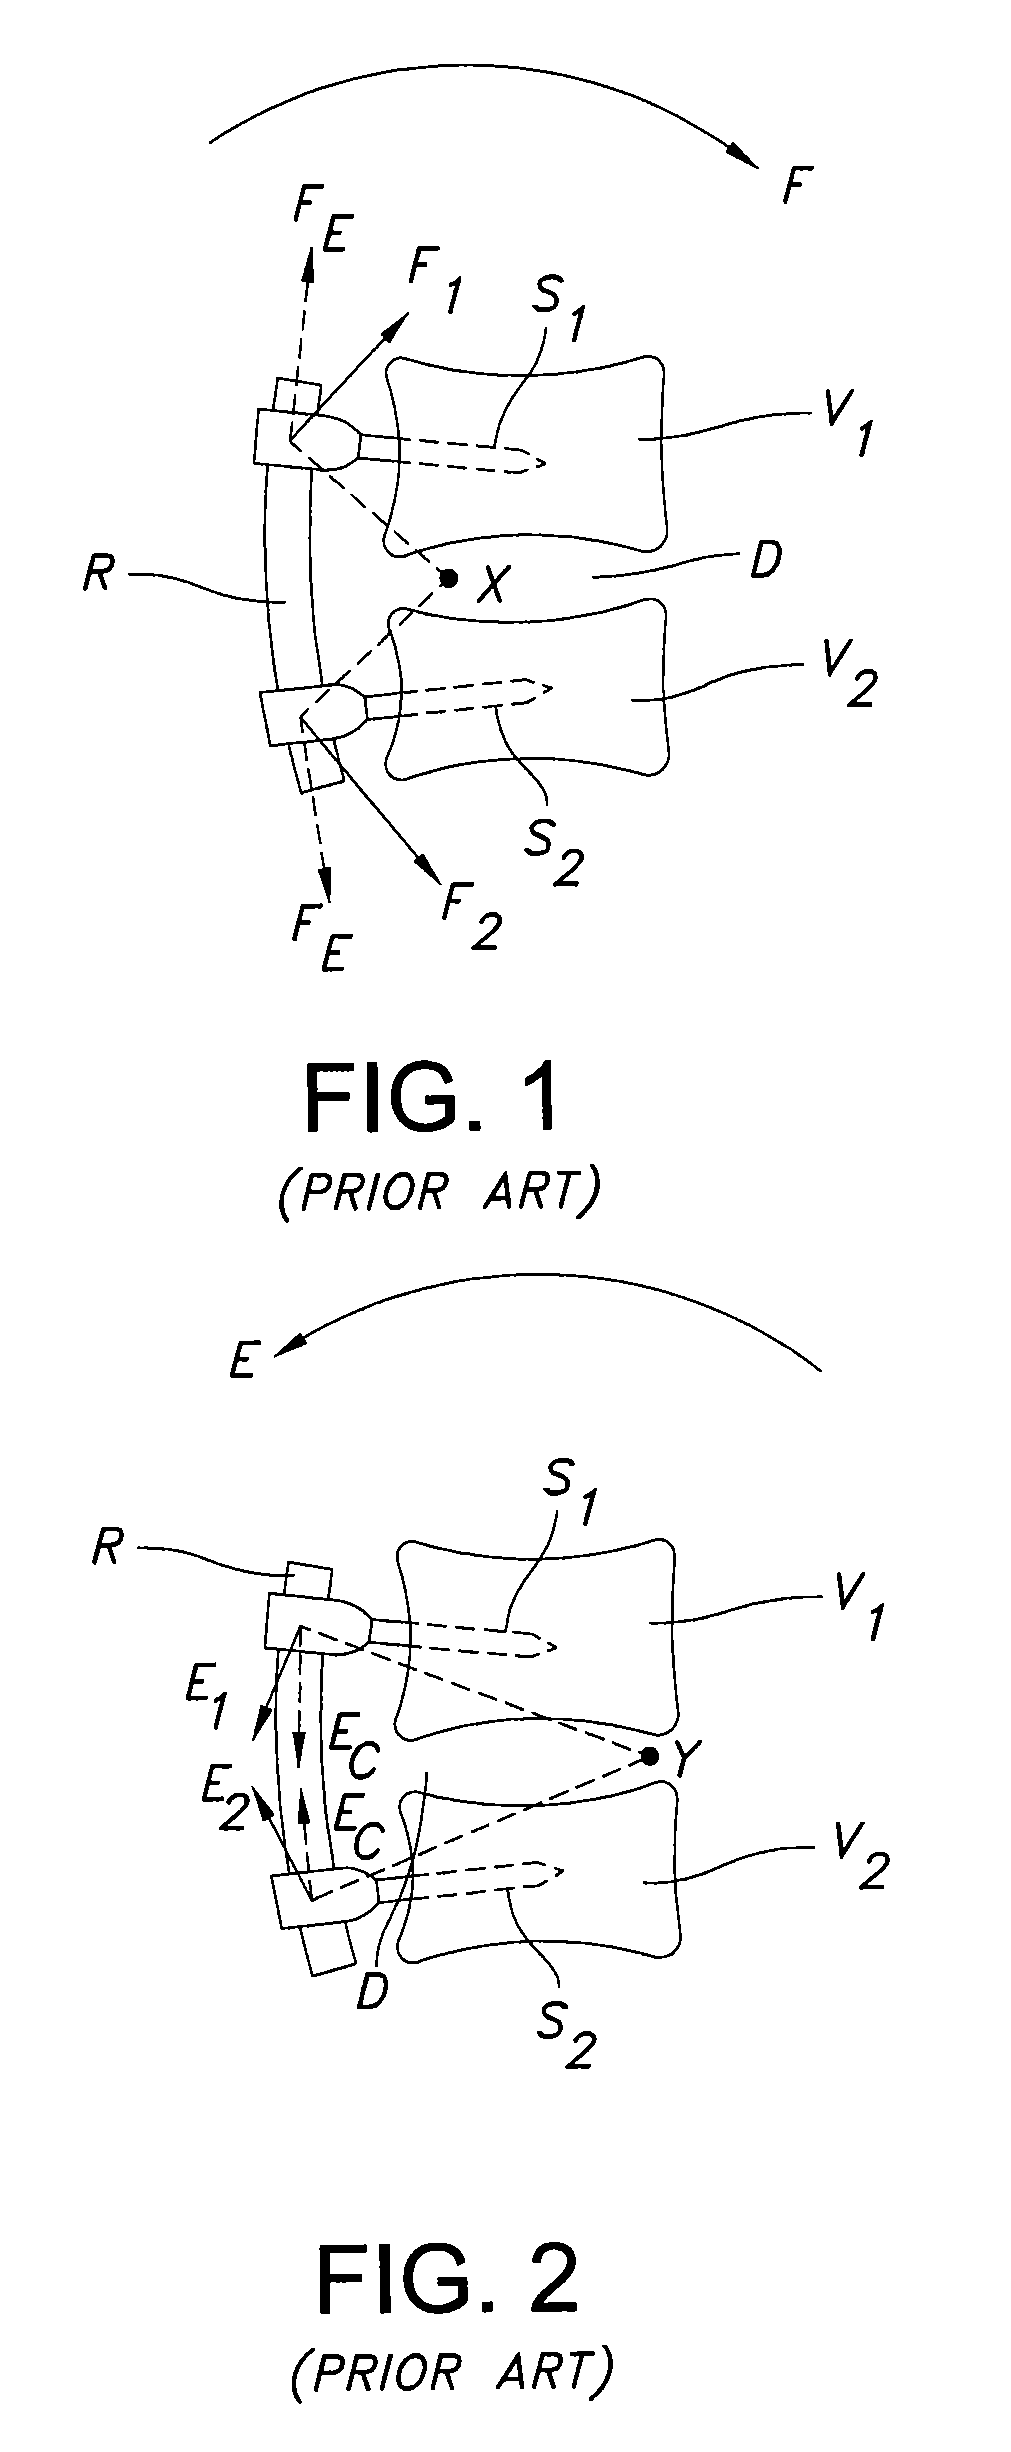 Rod assembly for dynamic posterior stabilization